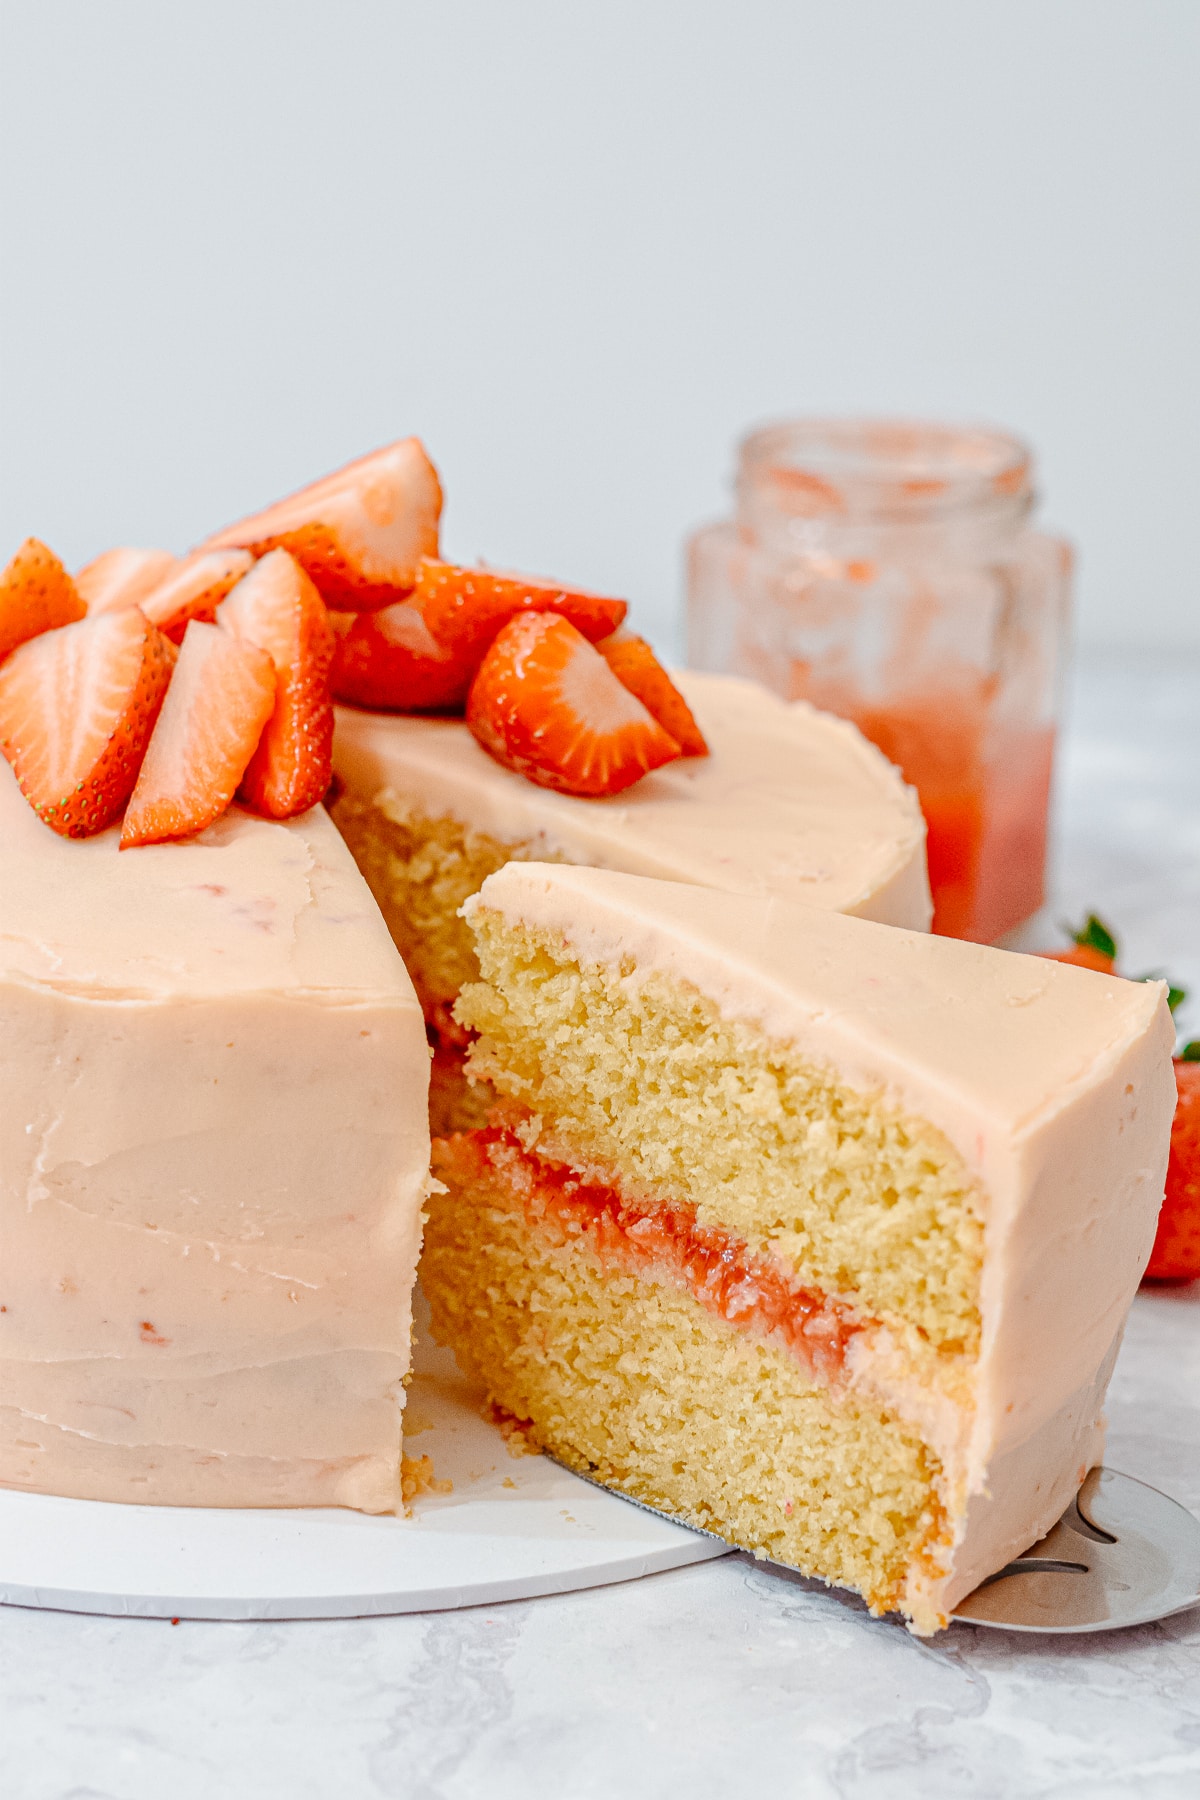 pink strawberry vanilla layer cake with a slice taken out showing strawberry filling and strawberry frosting, topped with fresh strawberries